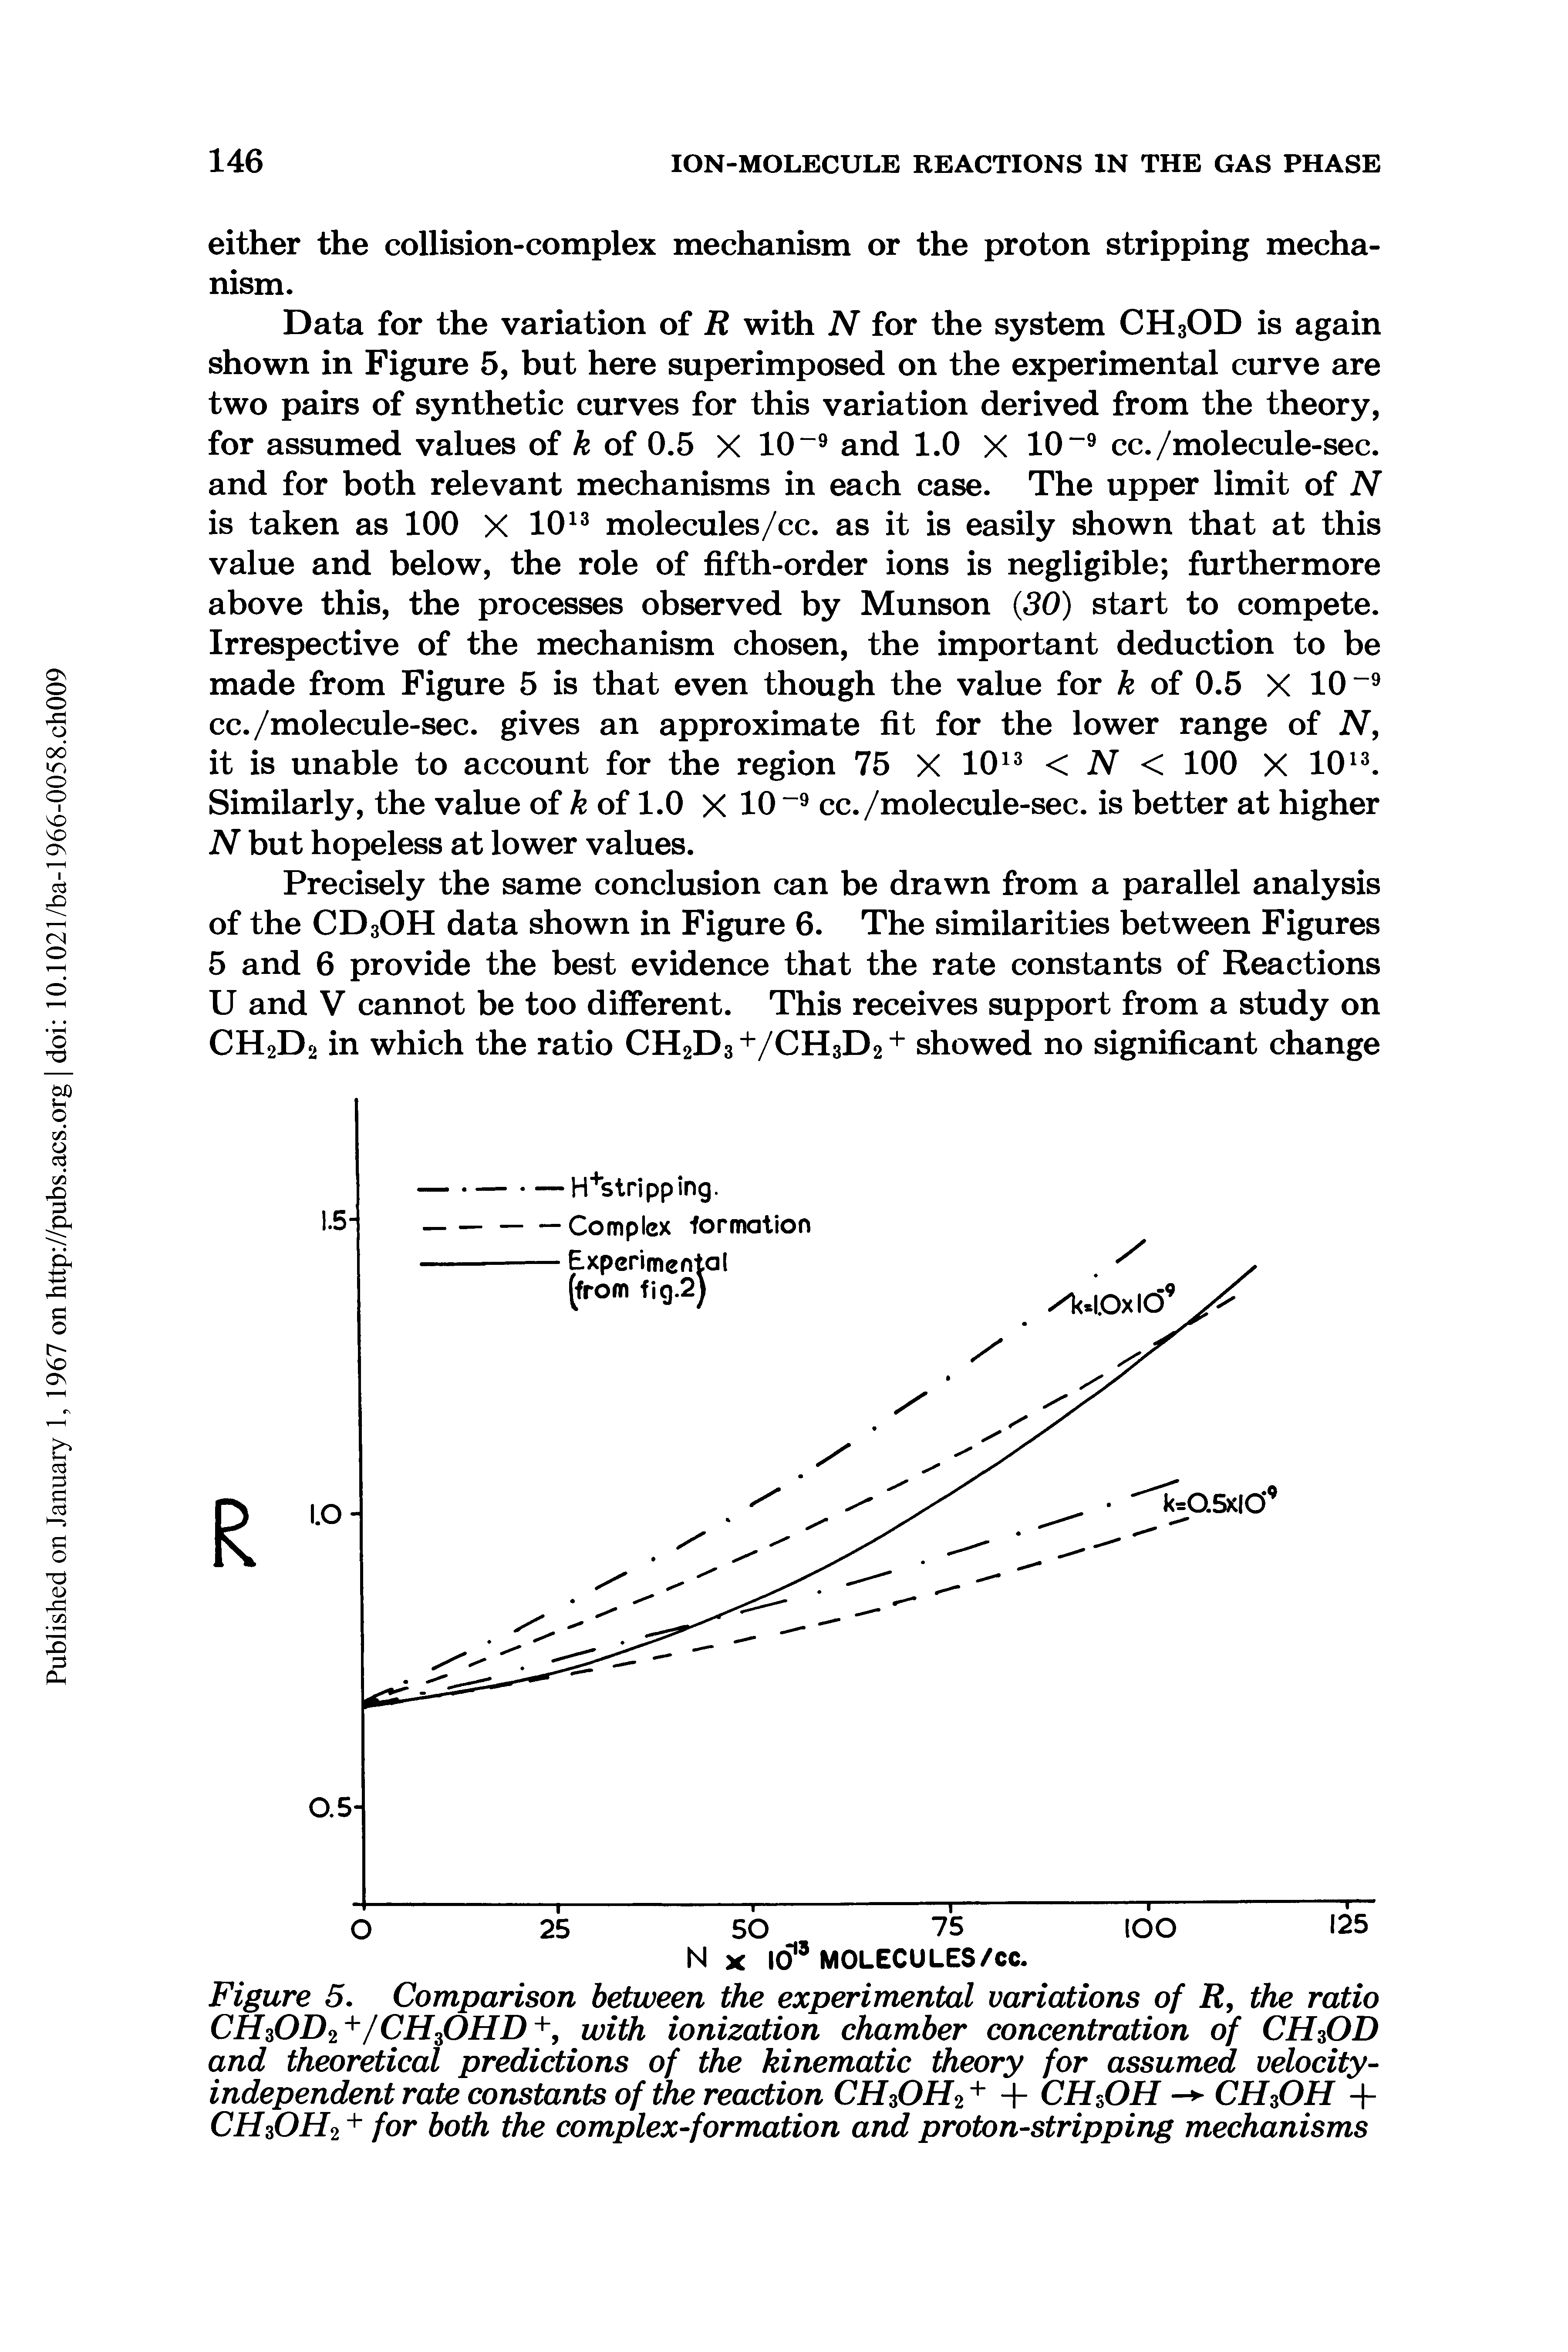 Figure 5. Comparison between the experimental variations of R, the ratio CH3OD2 V CHjOHD +, with ionization chamber concentration of CHsOD and theoretical predictions of the kinematic theory for assumed velocity-independent rate constants of the reaction CtUOH2 + + CH5OH - CH3OH + CH3OH2+ for both the complex-formation and proton-stripping mechanisms...